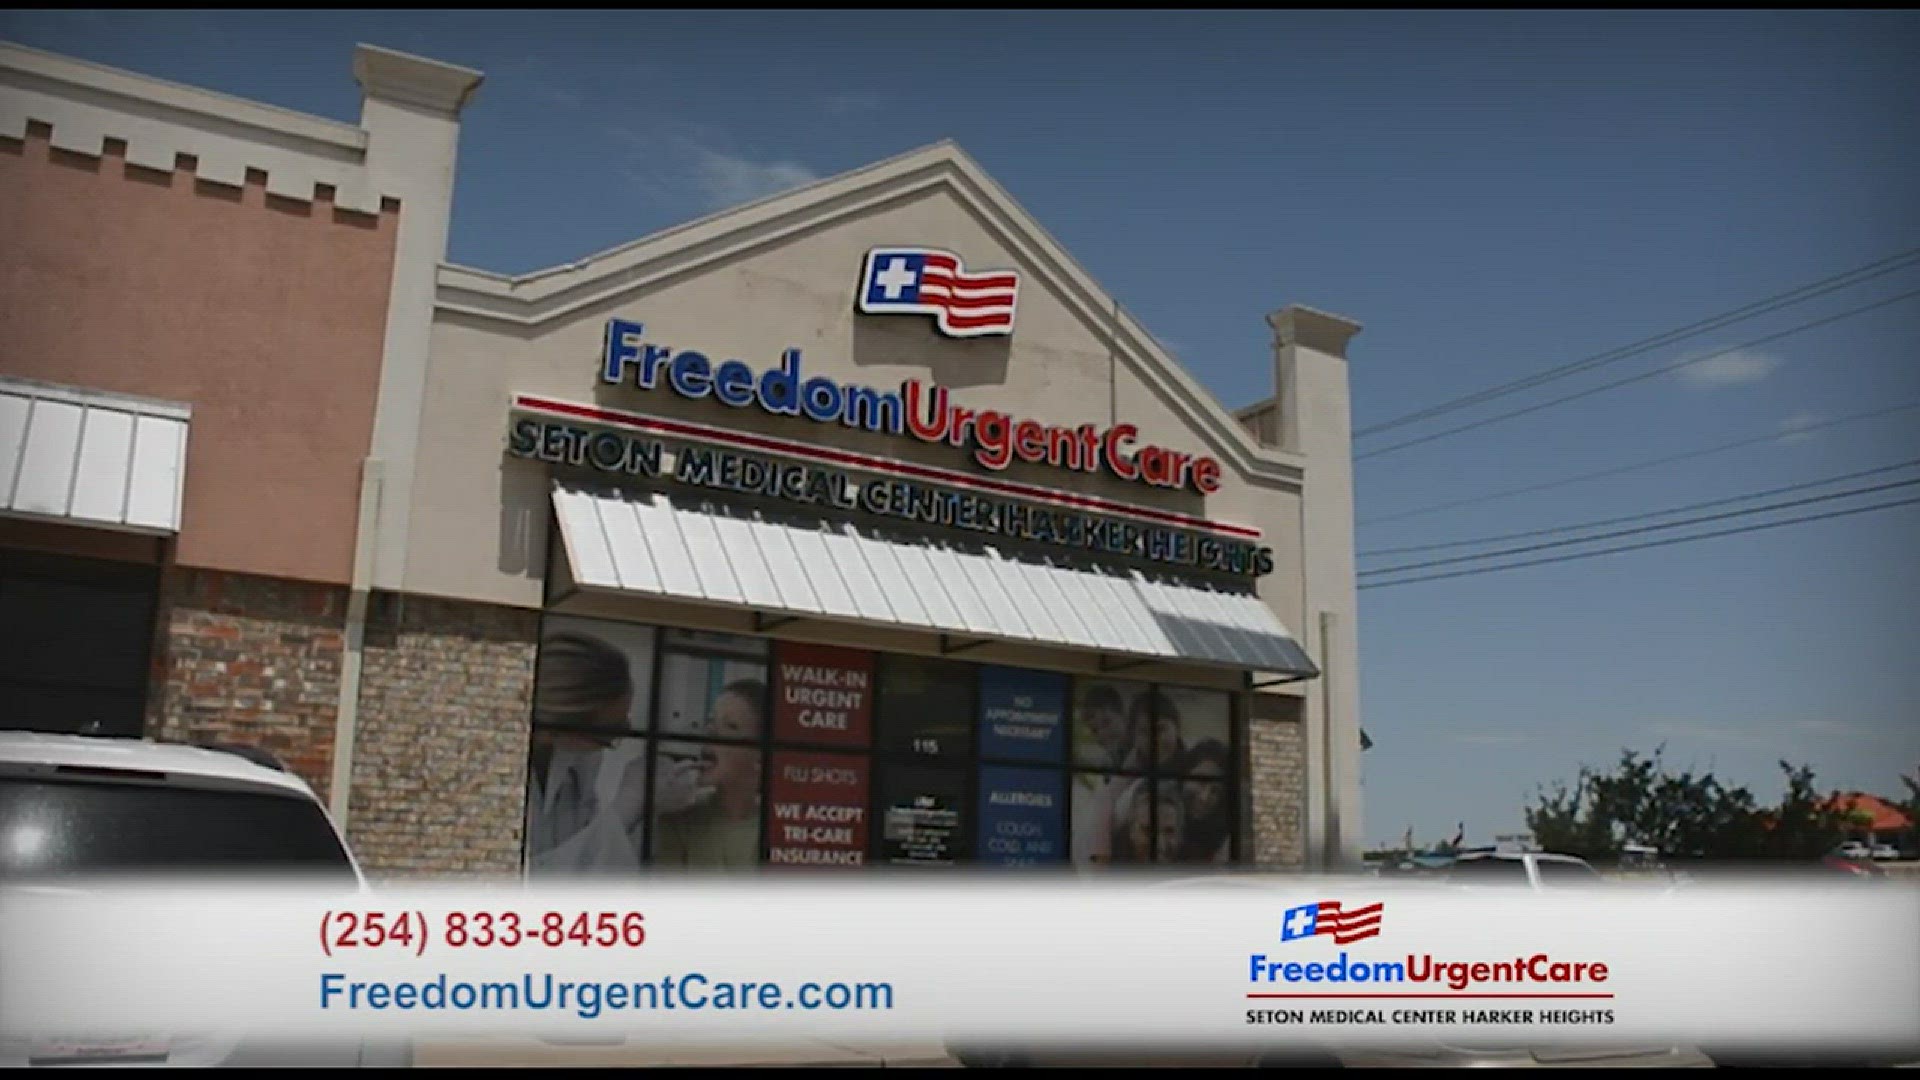 Freedom Urgent Care is now open in Killeen and Harker Heights.